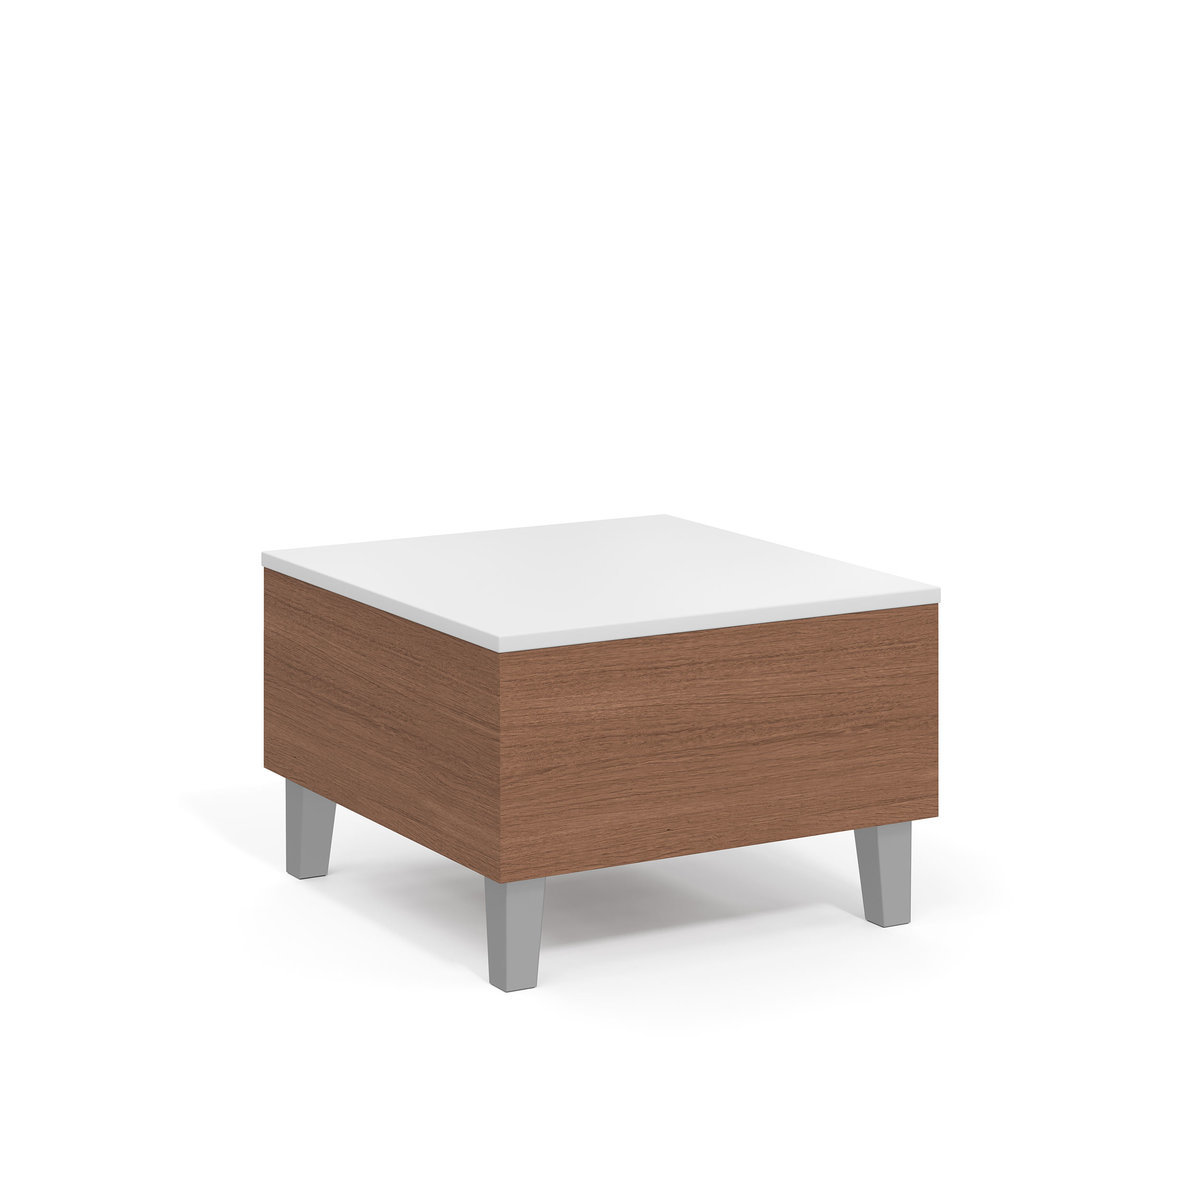 Square Spacer Table Photo